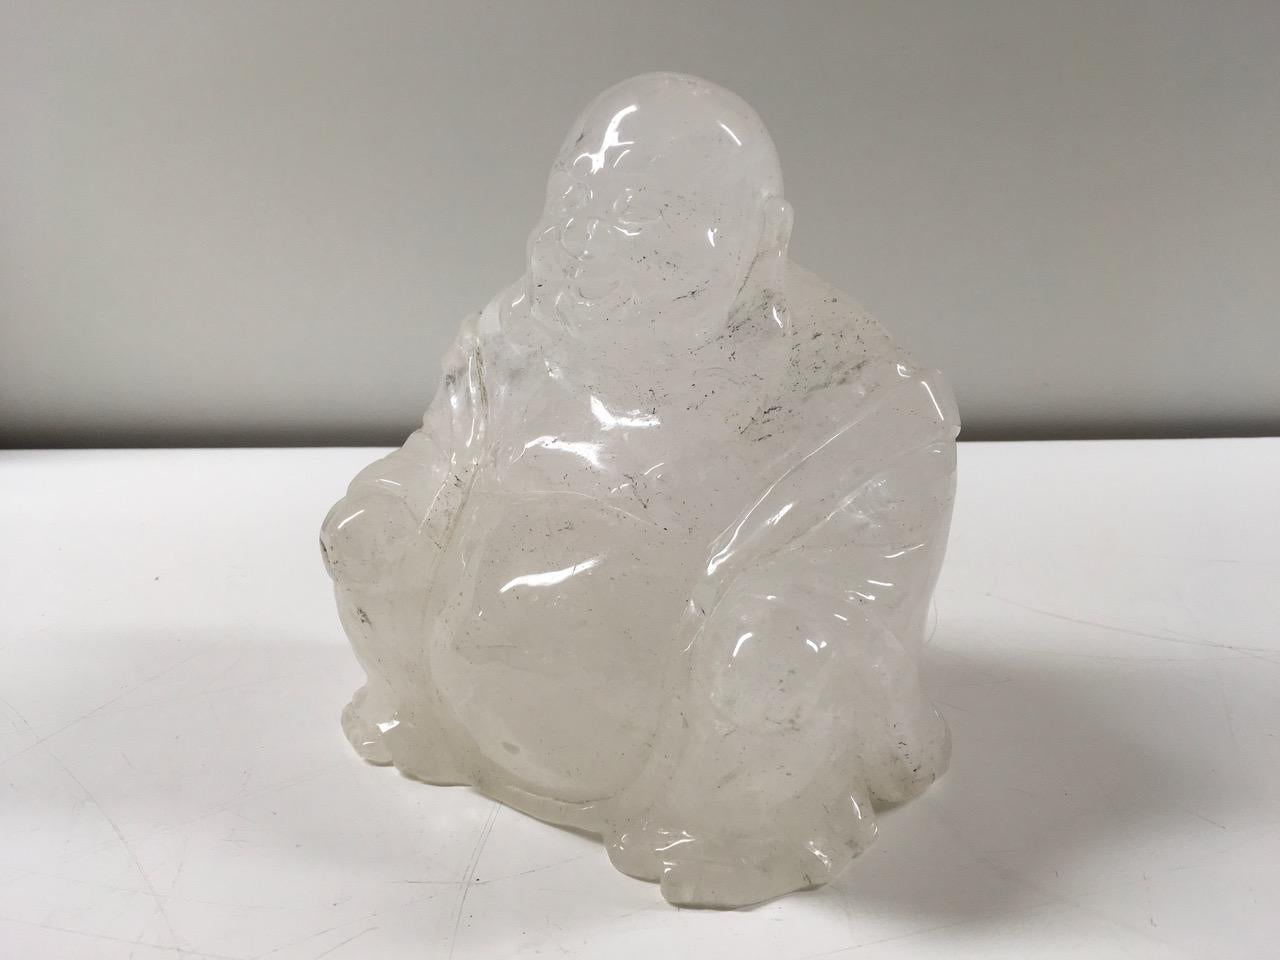 A beautiful sculpture in quartz produced in China. Italian private collection. 